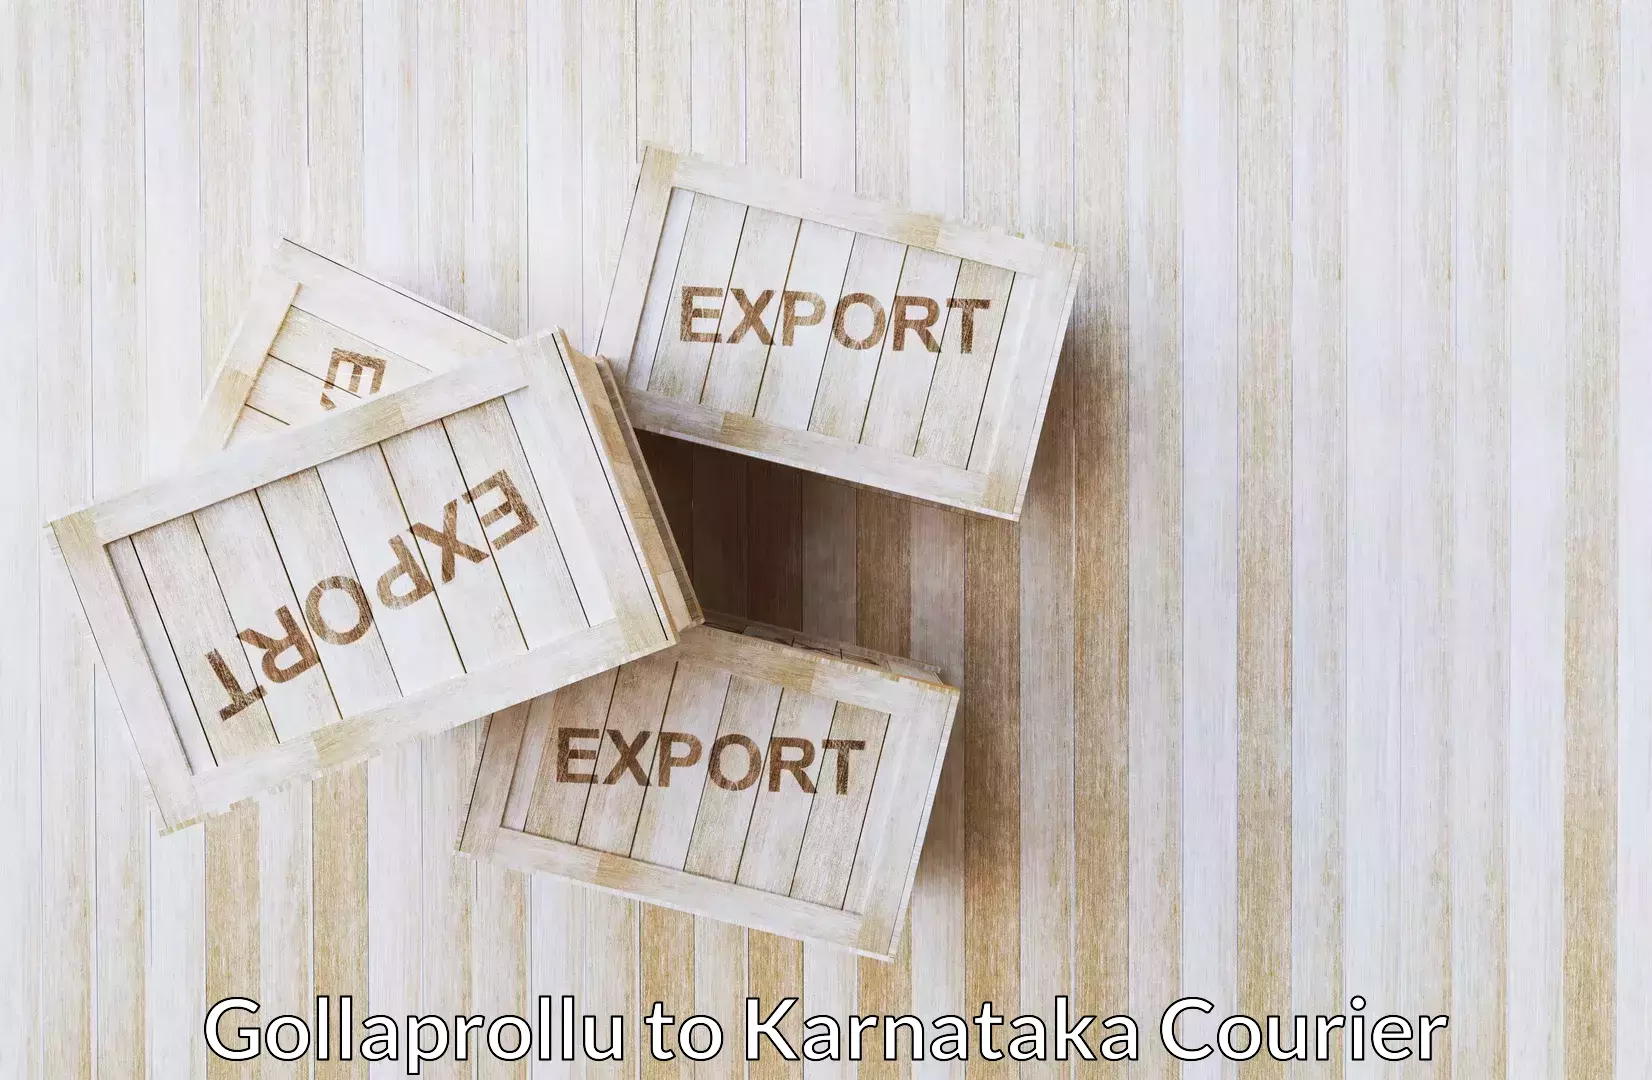 Home relocation experts Gollaprollu to Davangere